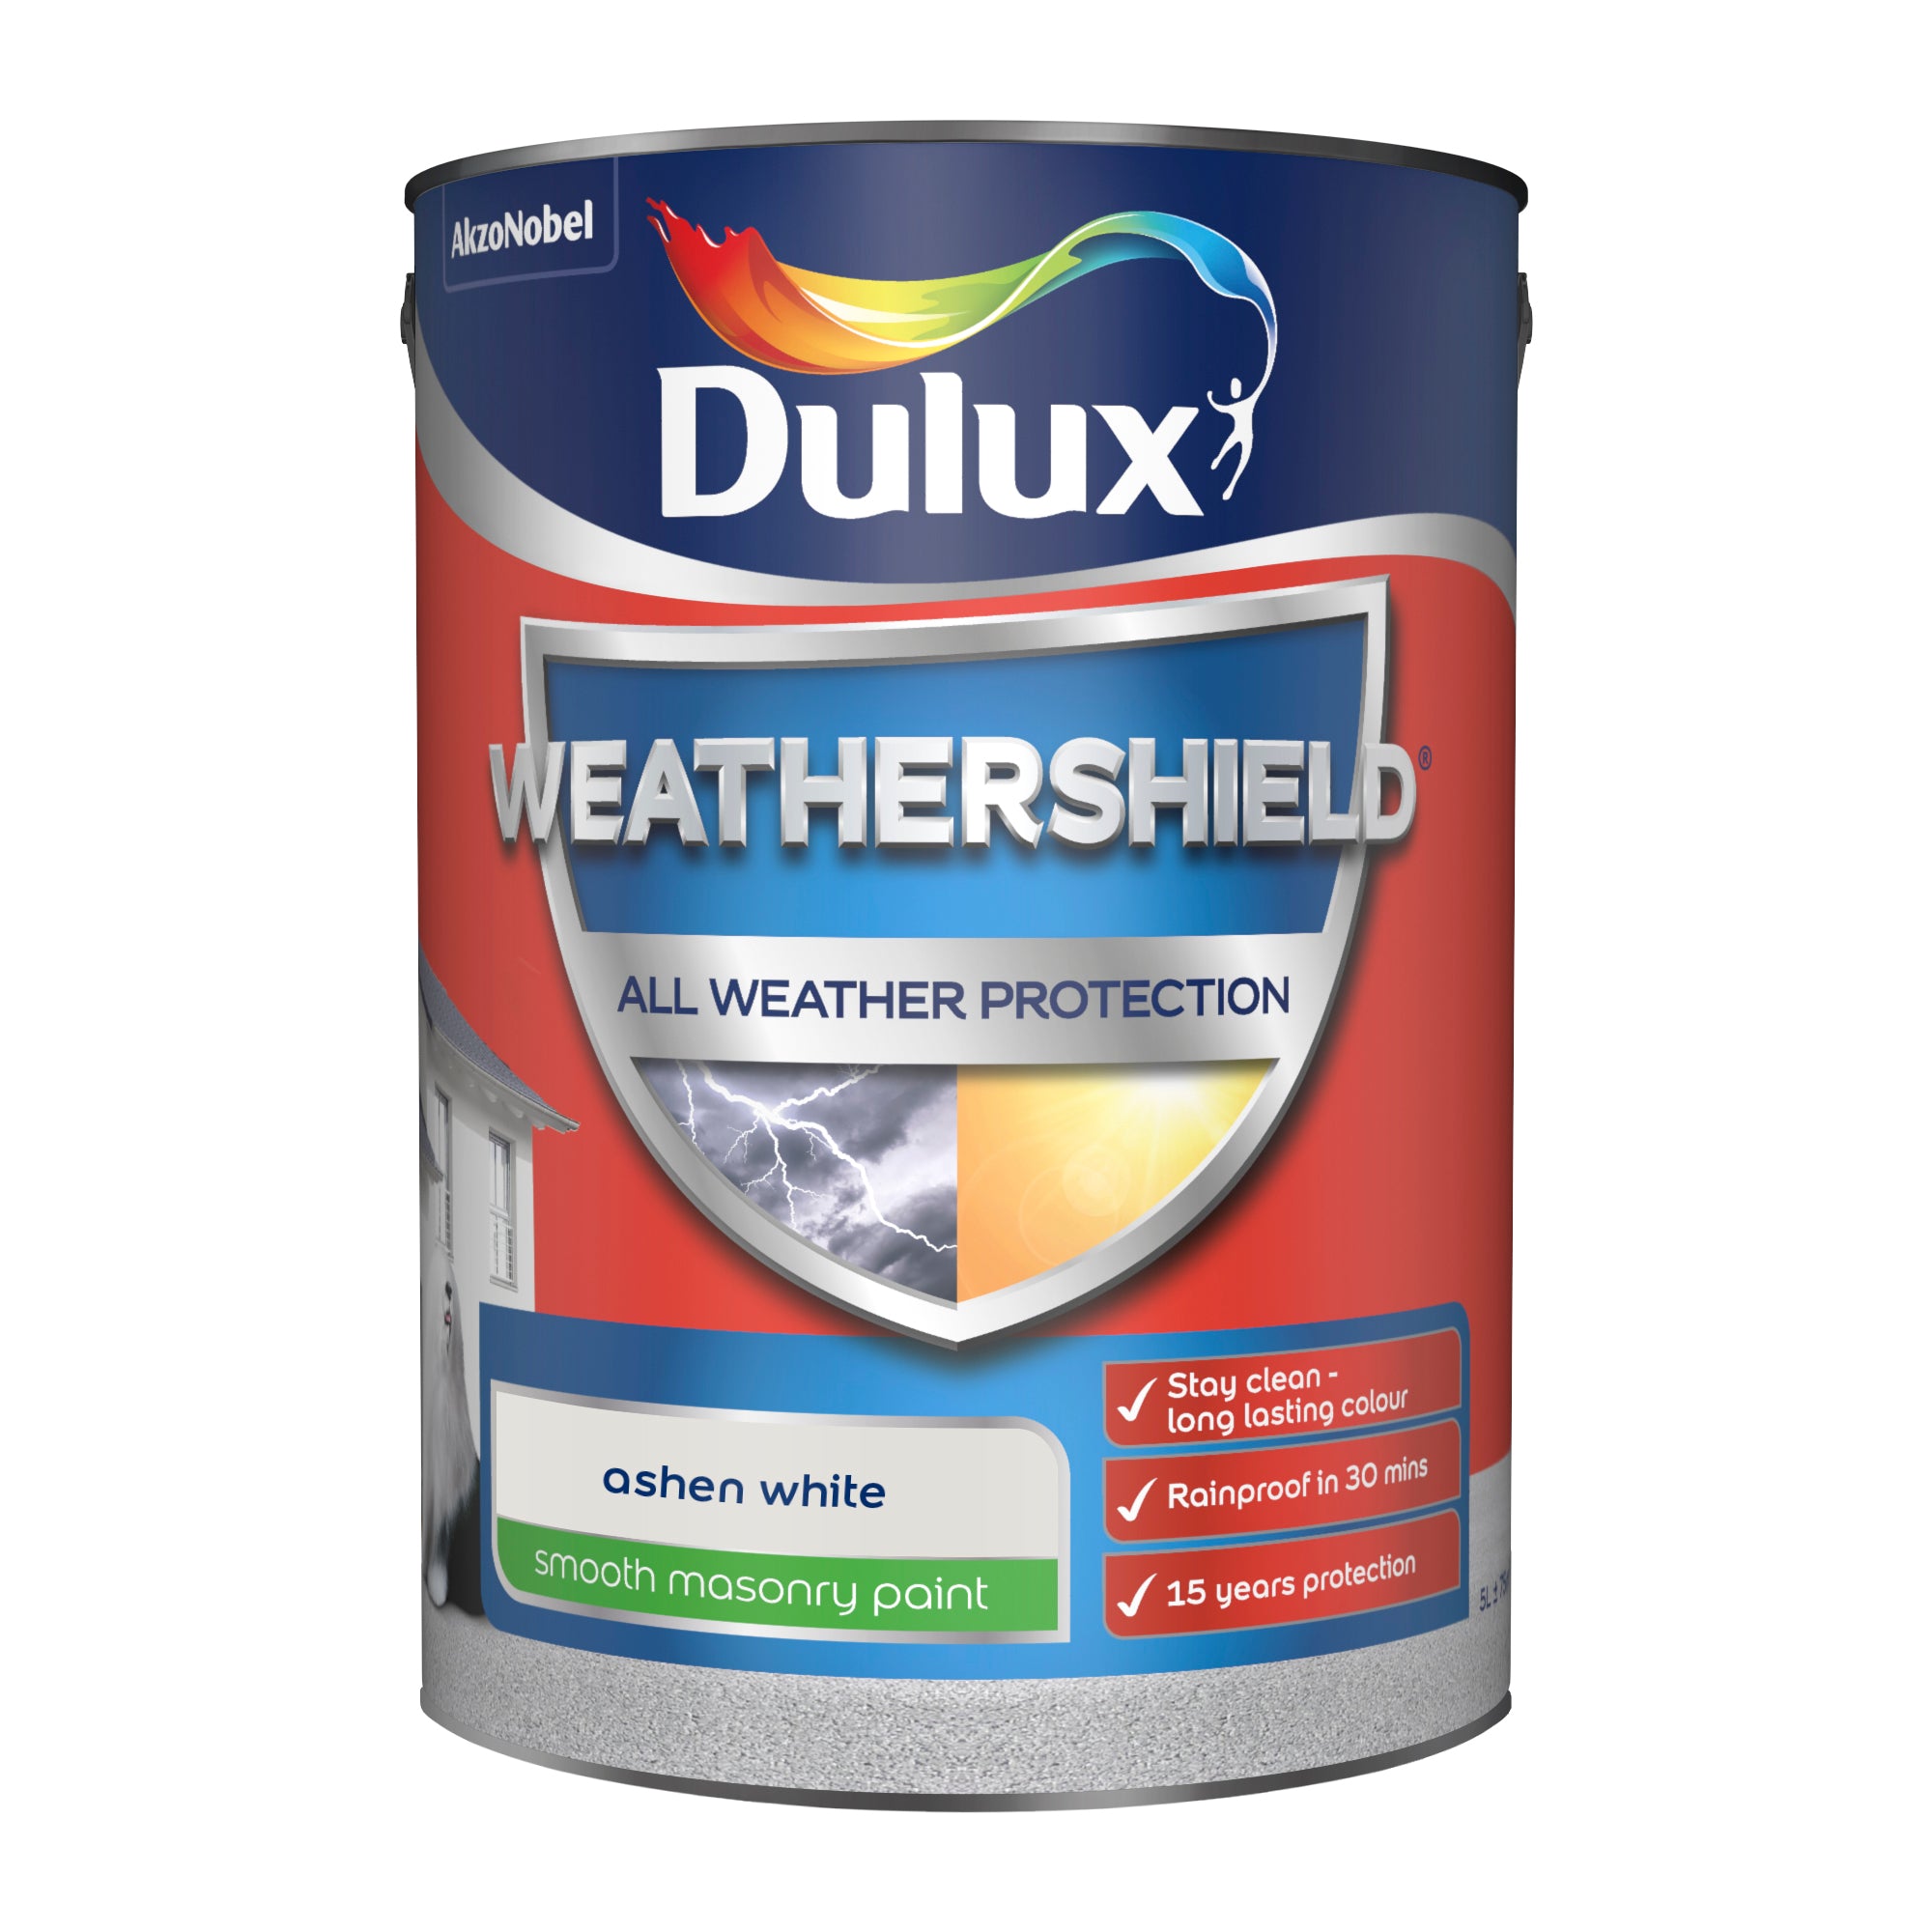 Dulux Weathershield All Weather Protection Smooth Ashen White 5L